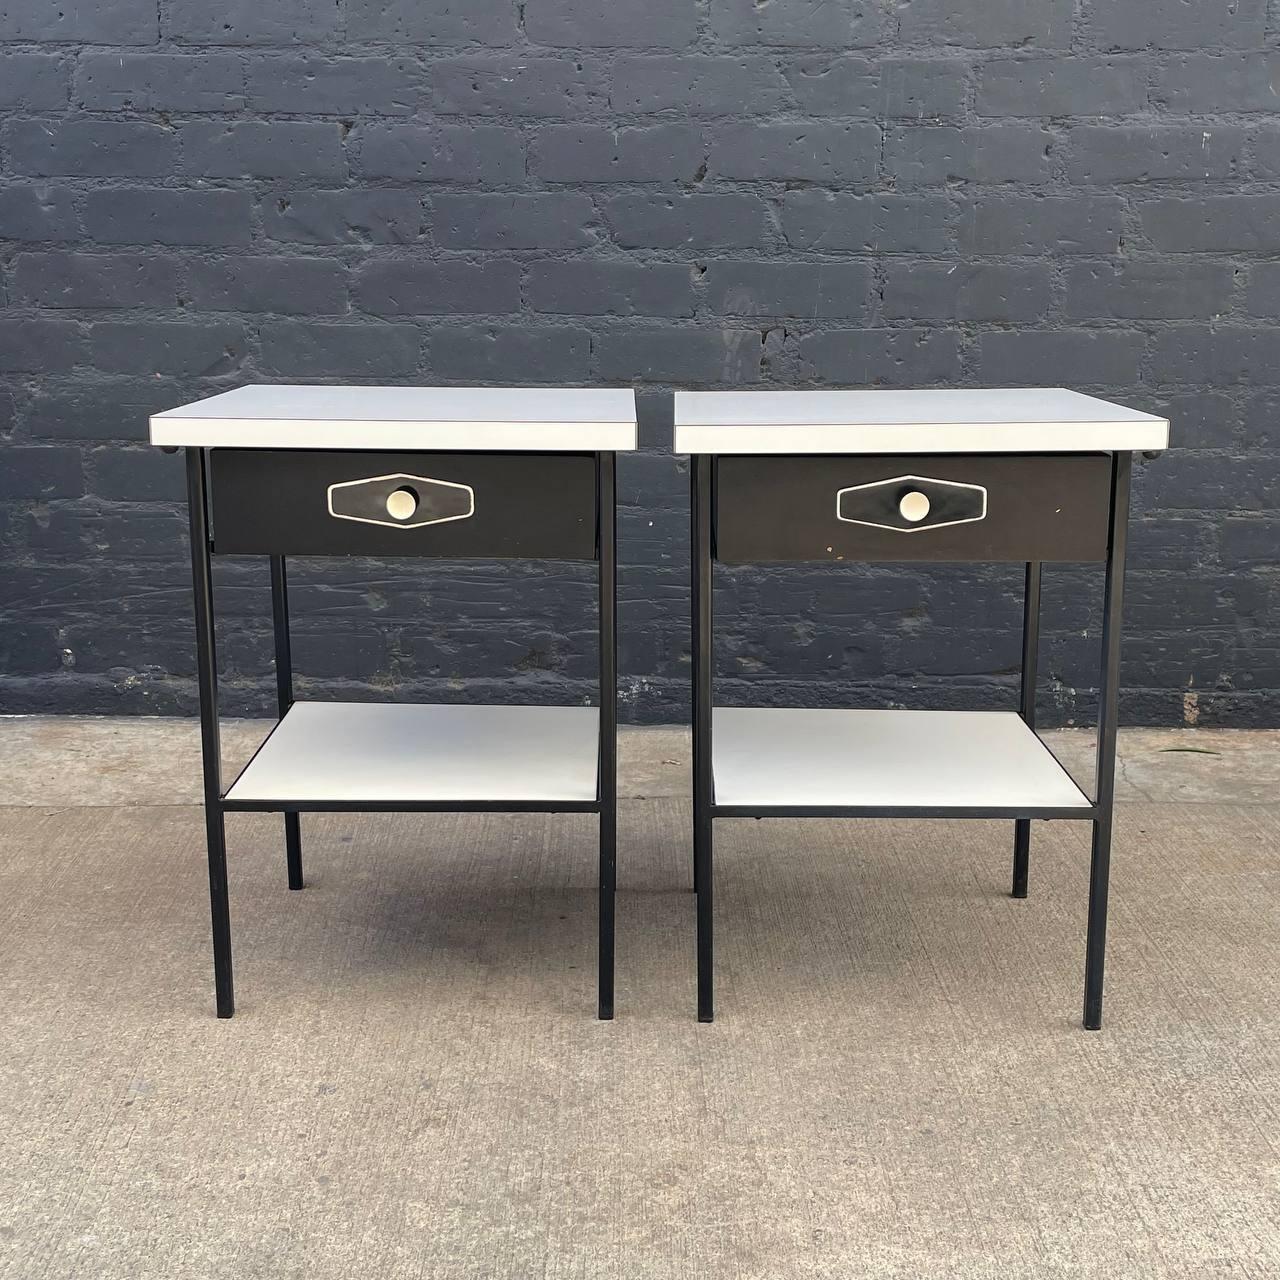 Pair of Vintage Mid-Century Modern Two-Tier Night Stands In Good Condition For Sale In Los Angeles, CA